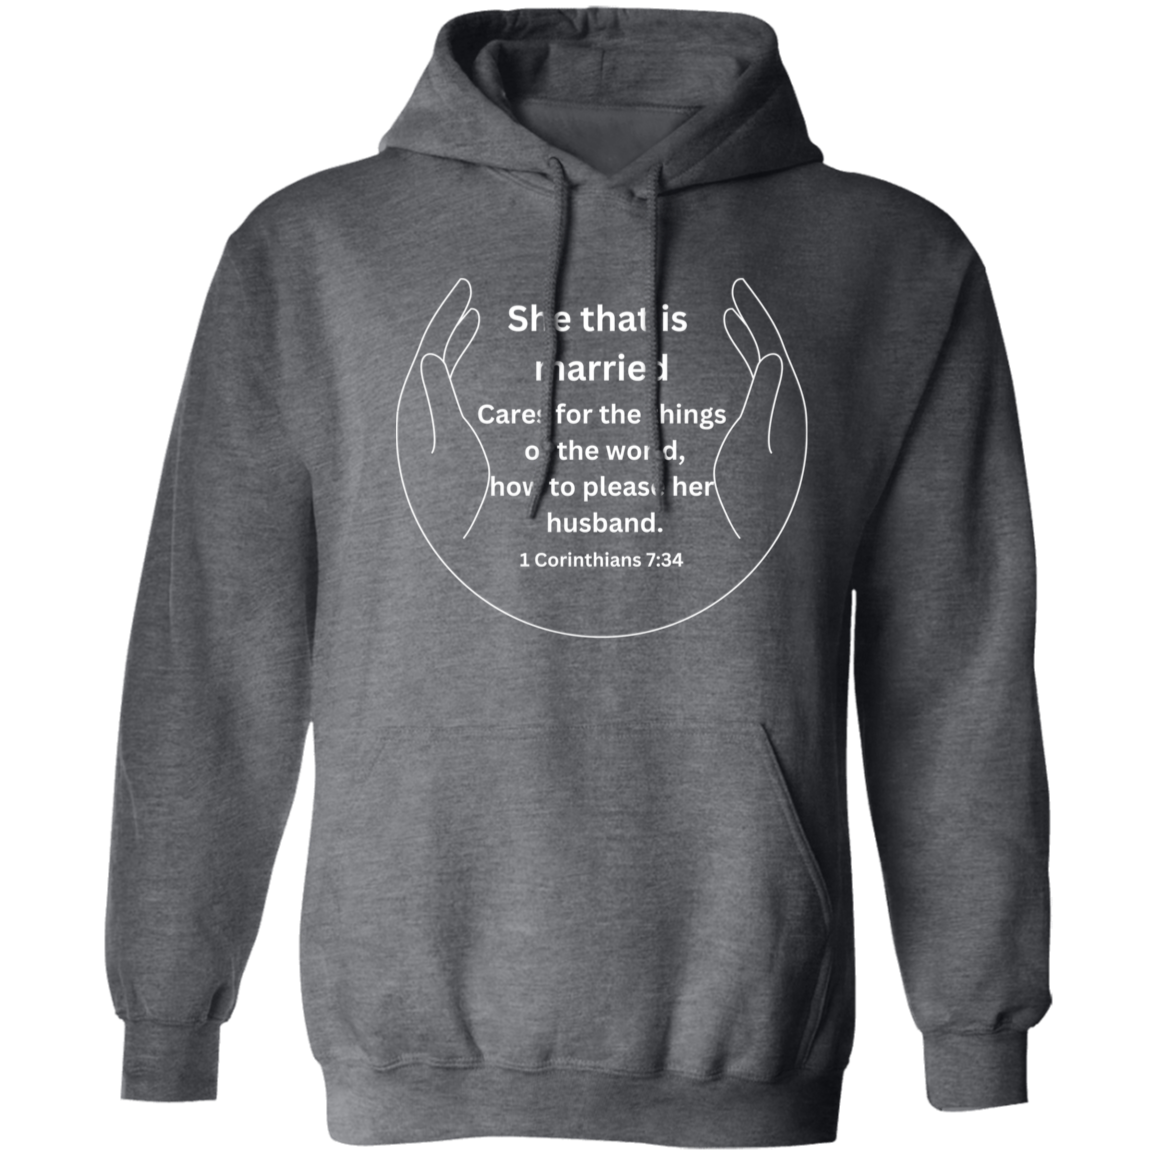 She that is married hoodies